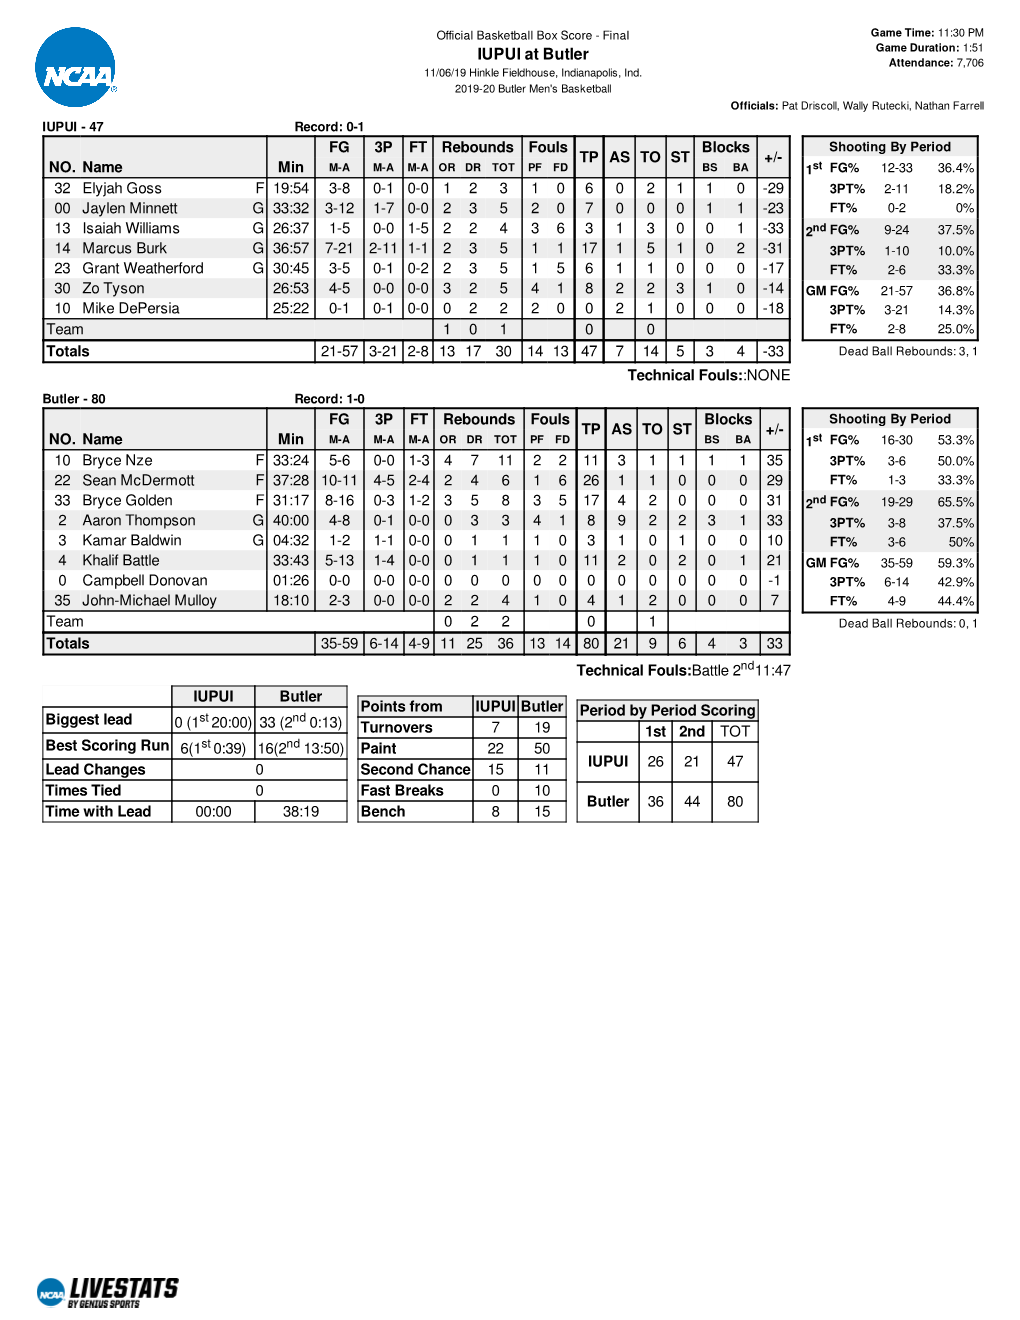 Box Score - Final Game Time: 11:30 PM Game Duration: 1:51 IUPUI at Butler Attendance: 7,706 11/06/19 Hinkle Fieldhouse, Indianapolis, Ind